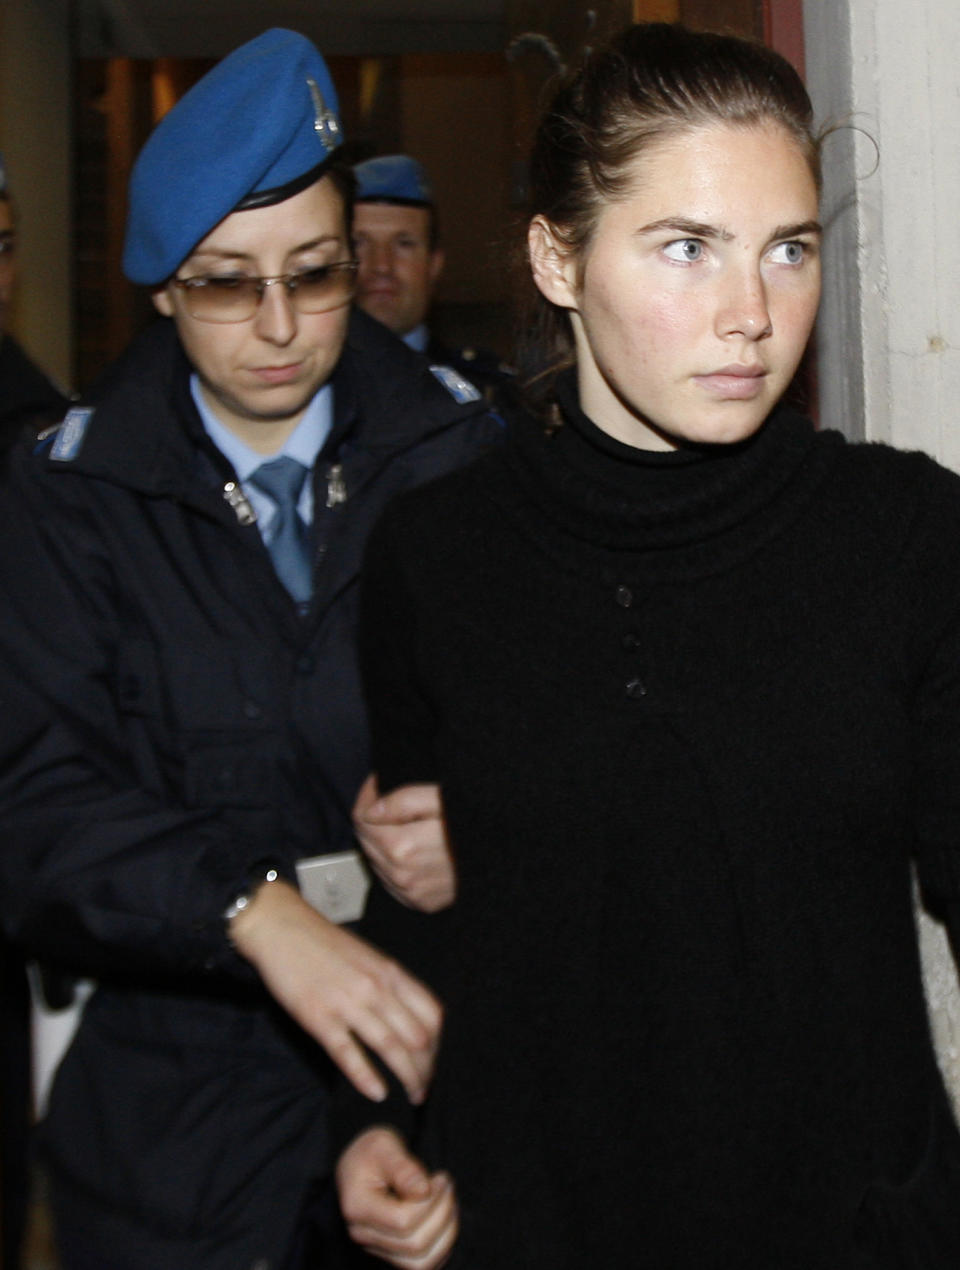 File- This Dec. 1, 2009 file photo shows U.S. murder suspect Amanda Knox being accompanied by a police penitentiary officer as she arrives for a hearing at the Perugia court, Italy. To many Americans, especially in her hometown of Seattle, Amanda Knox seems the victim, unfairly hounded by a capricious foreign legal system for the death of a 21-year-old British woman. But in Italy and elsewhere in Europe, others see her as someone who got away with murder, embroiled in a case that continues to make global headlines and reinforces a negative image of Americans behaving badly, even criminally, abroad without any punishment. As she remains free in the U.S., these perceptions will not only fuel the debate about who killed Meredith Kercher in 2007 and what role, if any, Knox played in her death, but also about whether U.S. authorities should, if asked, send her to Italy to face prison. (AP Photo/Luca Bruno, File)